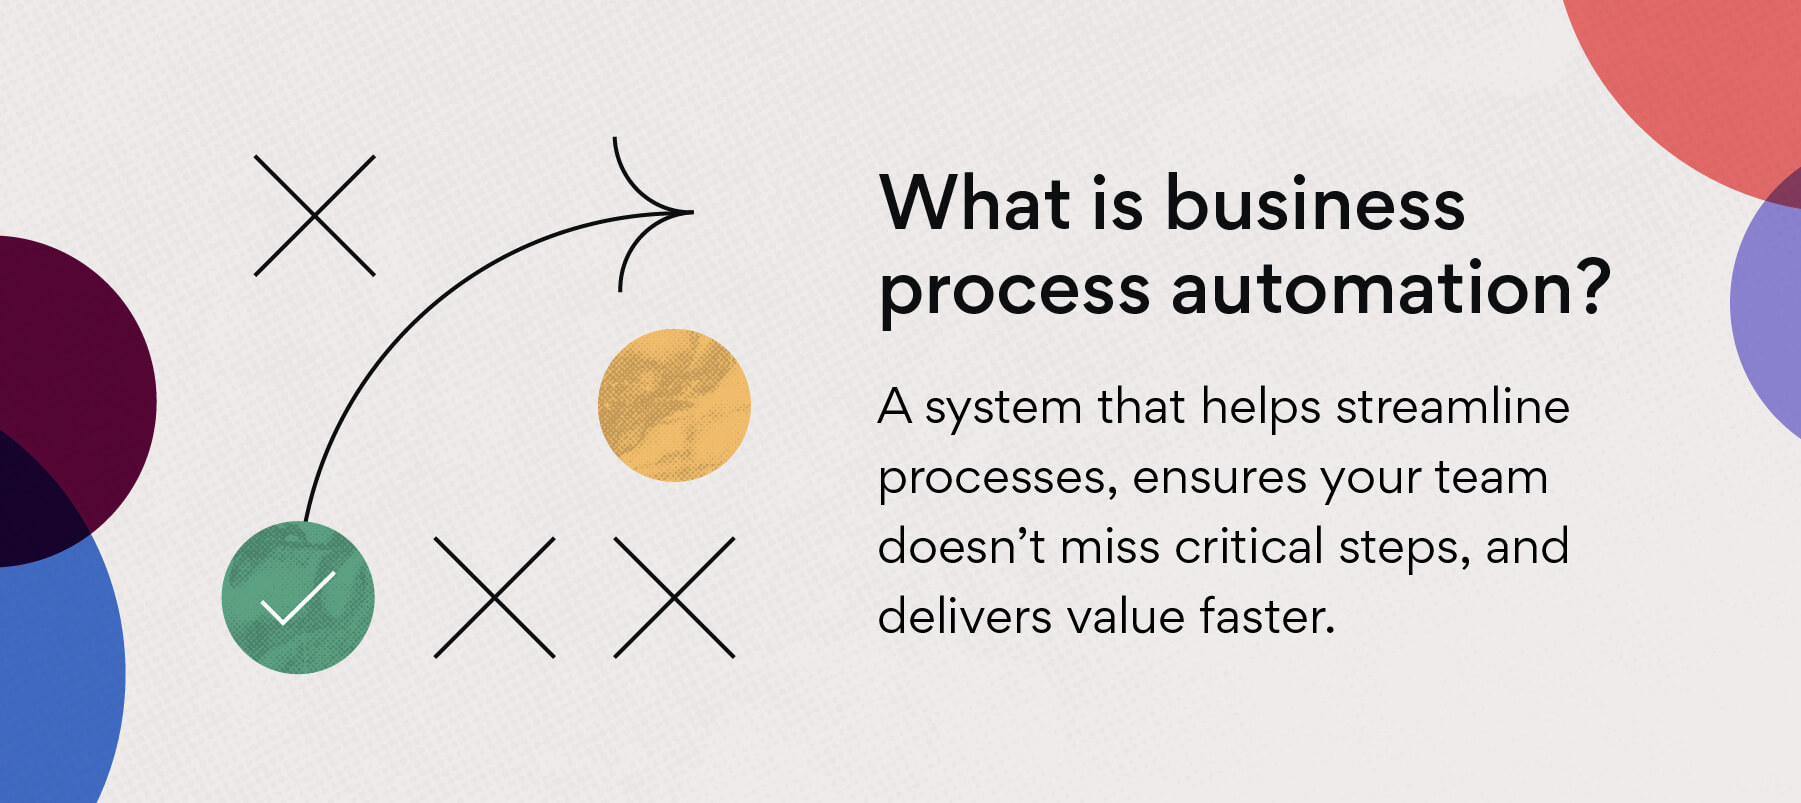 What is business process automation?